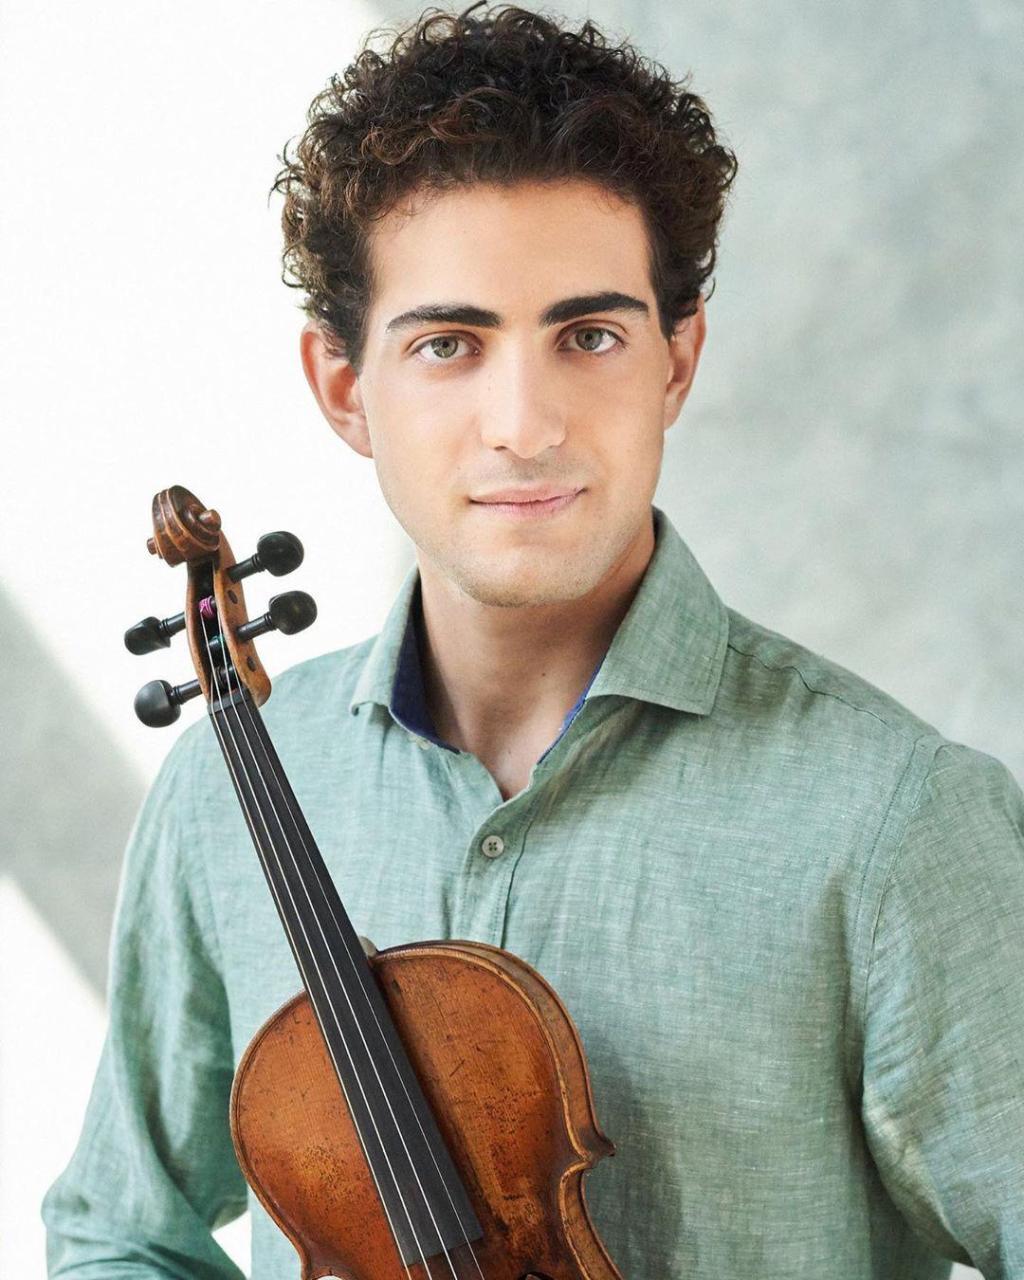 Azerbaijani violinist qualified for international competition